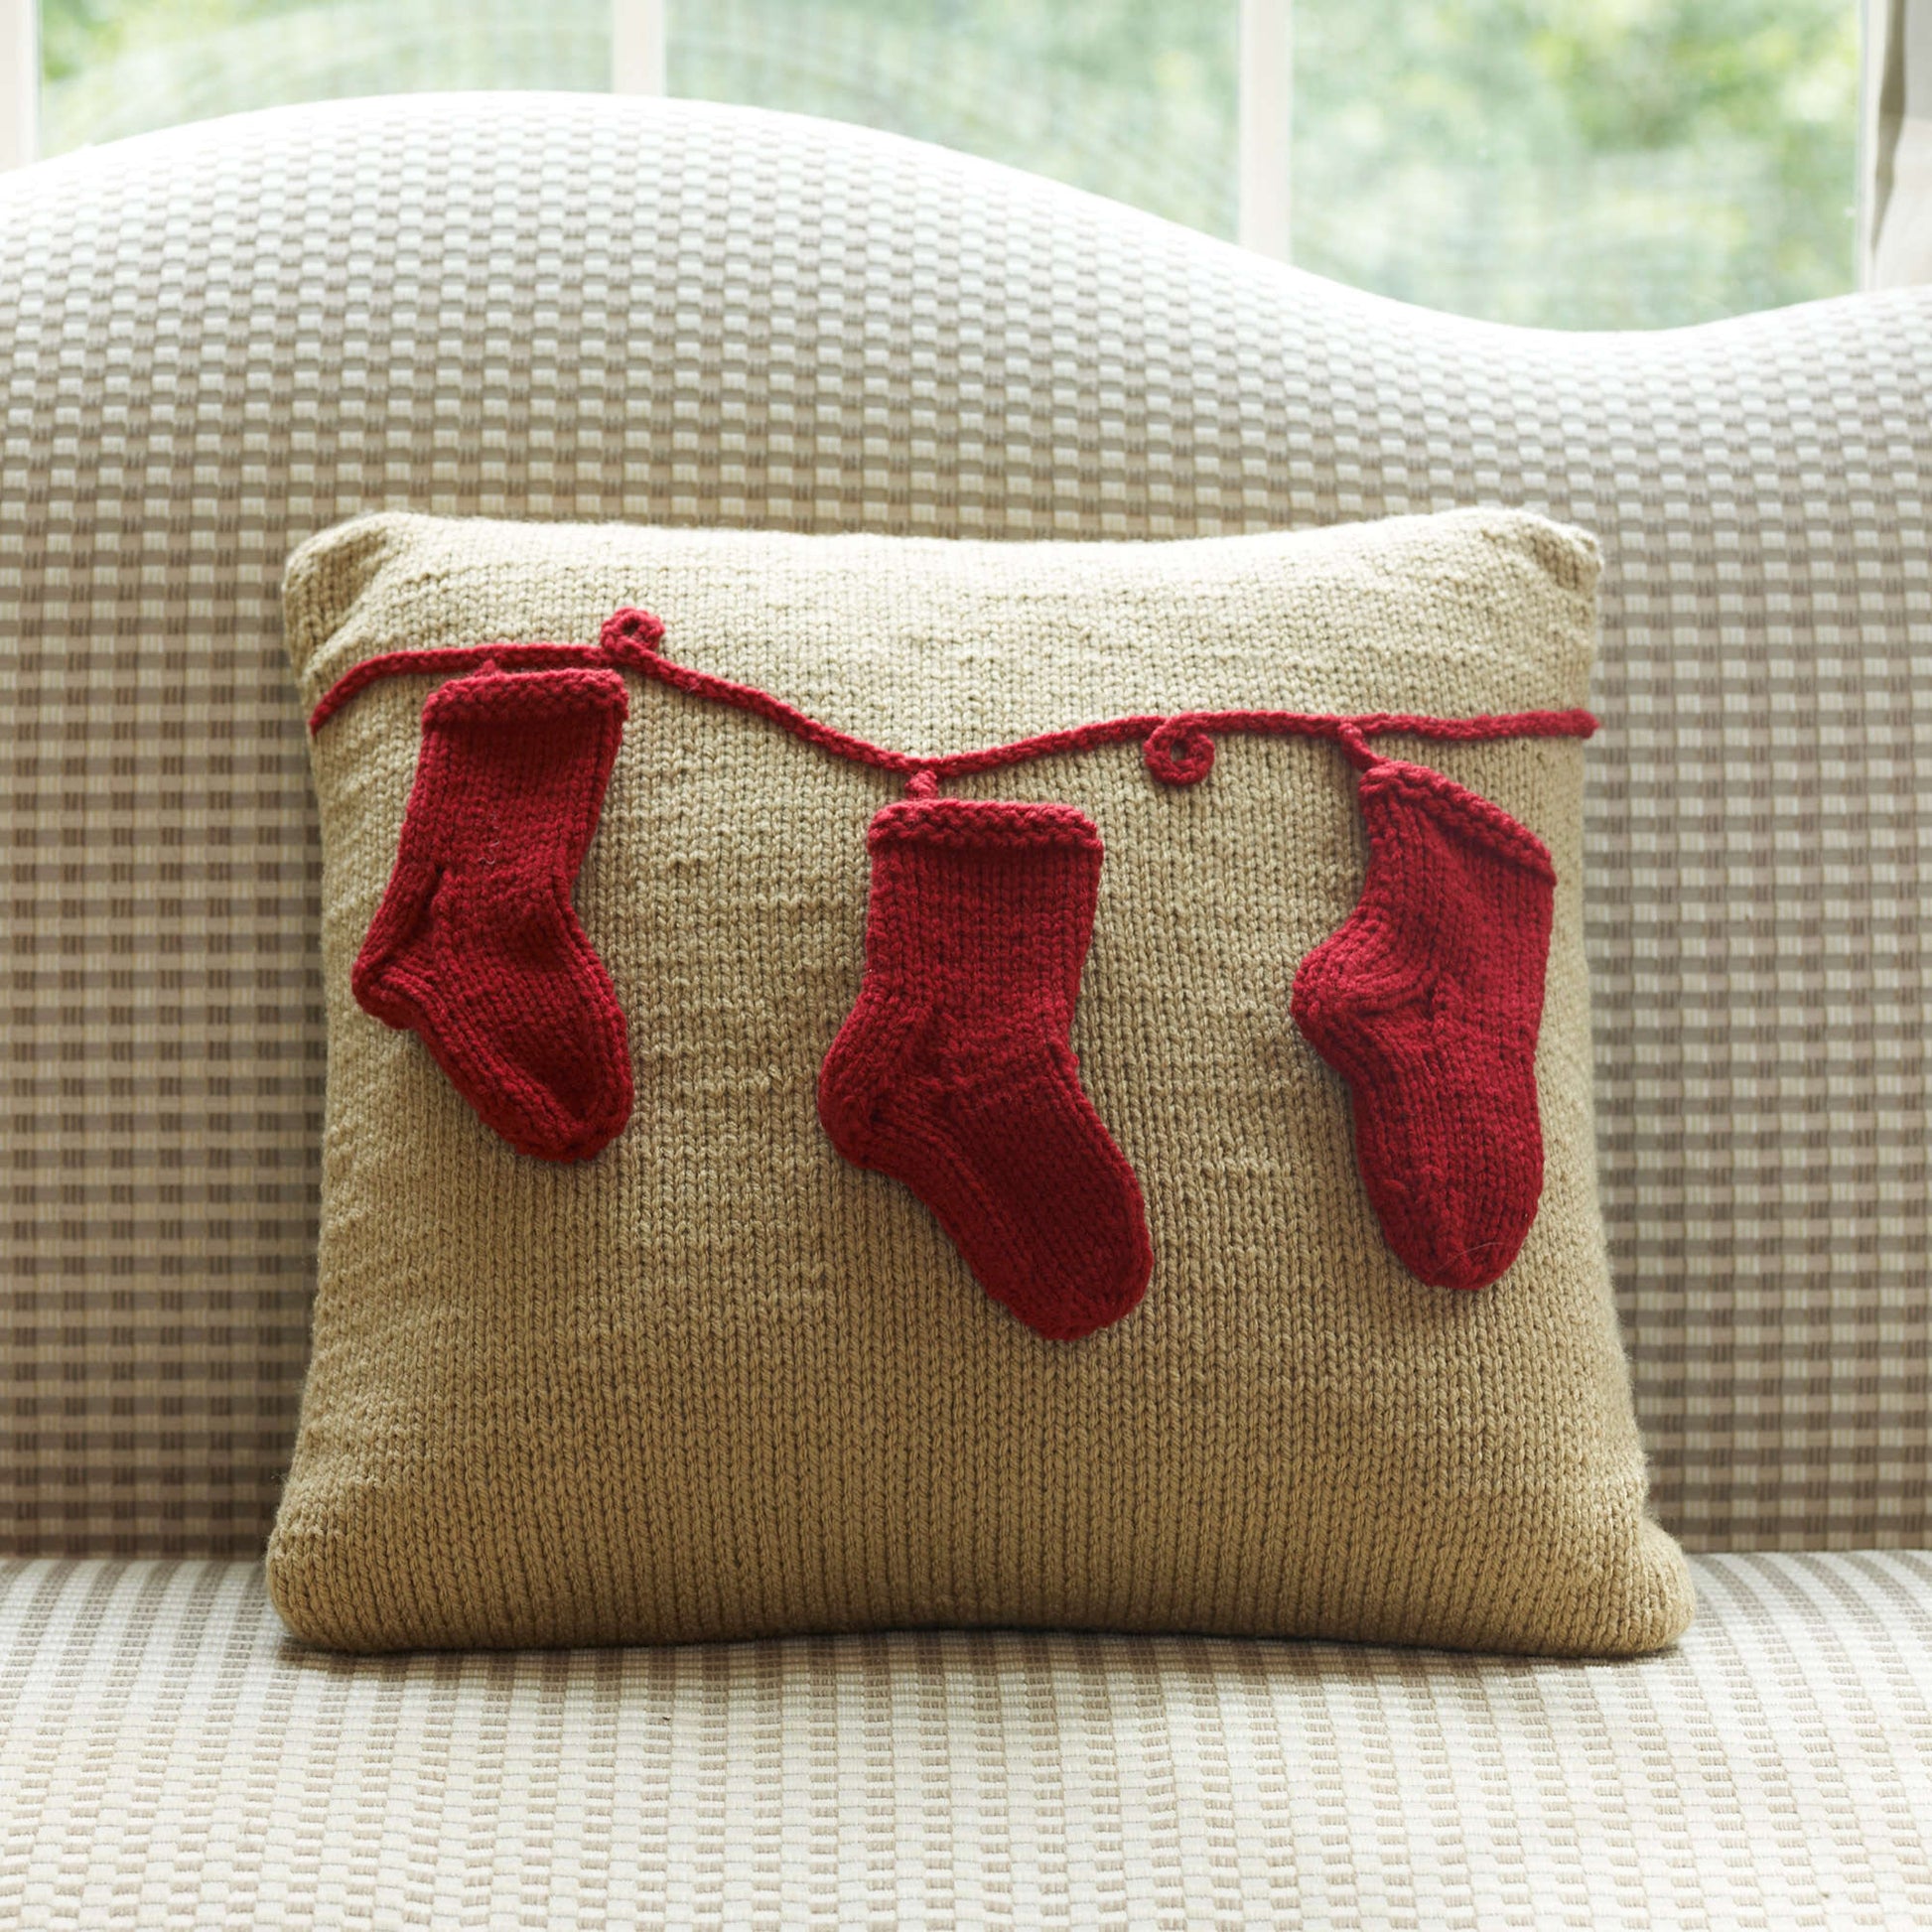 Free Red Heart Knit Holiday Pillow With Stockings Pattern